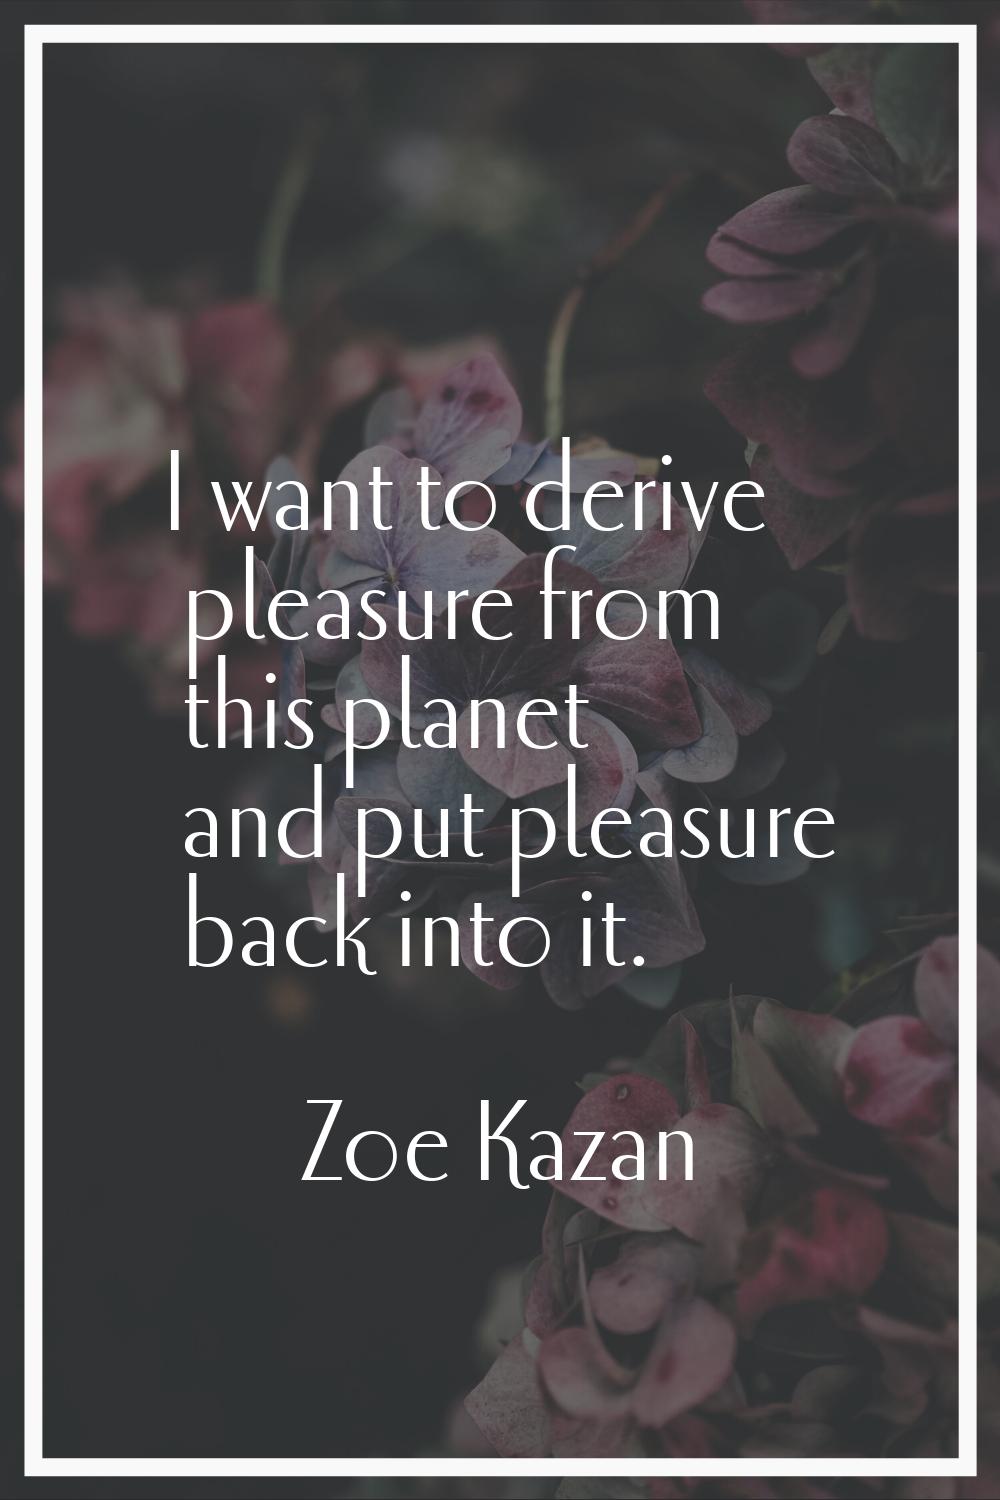 I want to derive pleasure from this planet and put pleasure back into it.